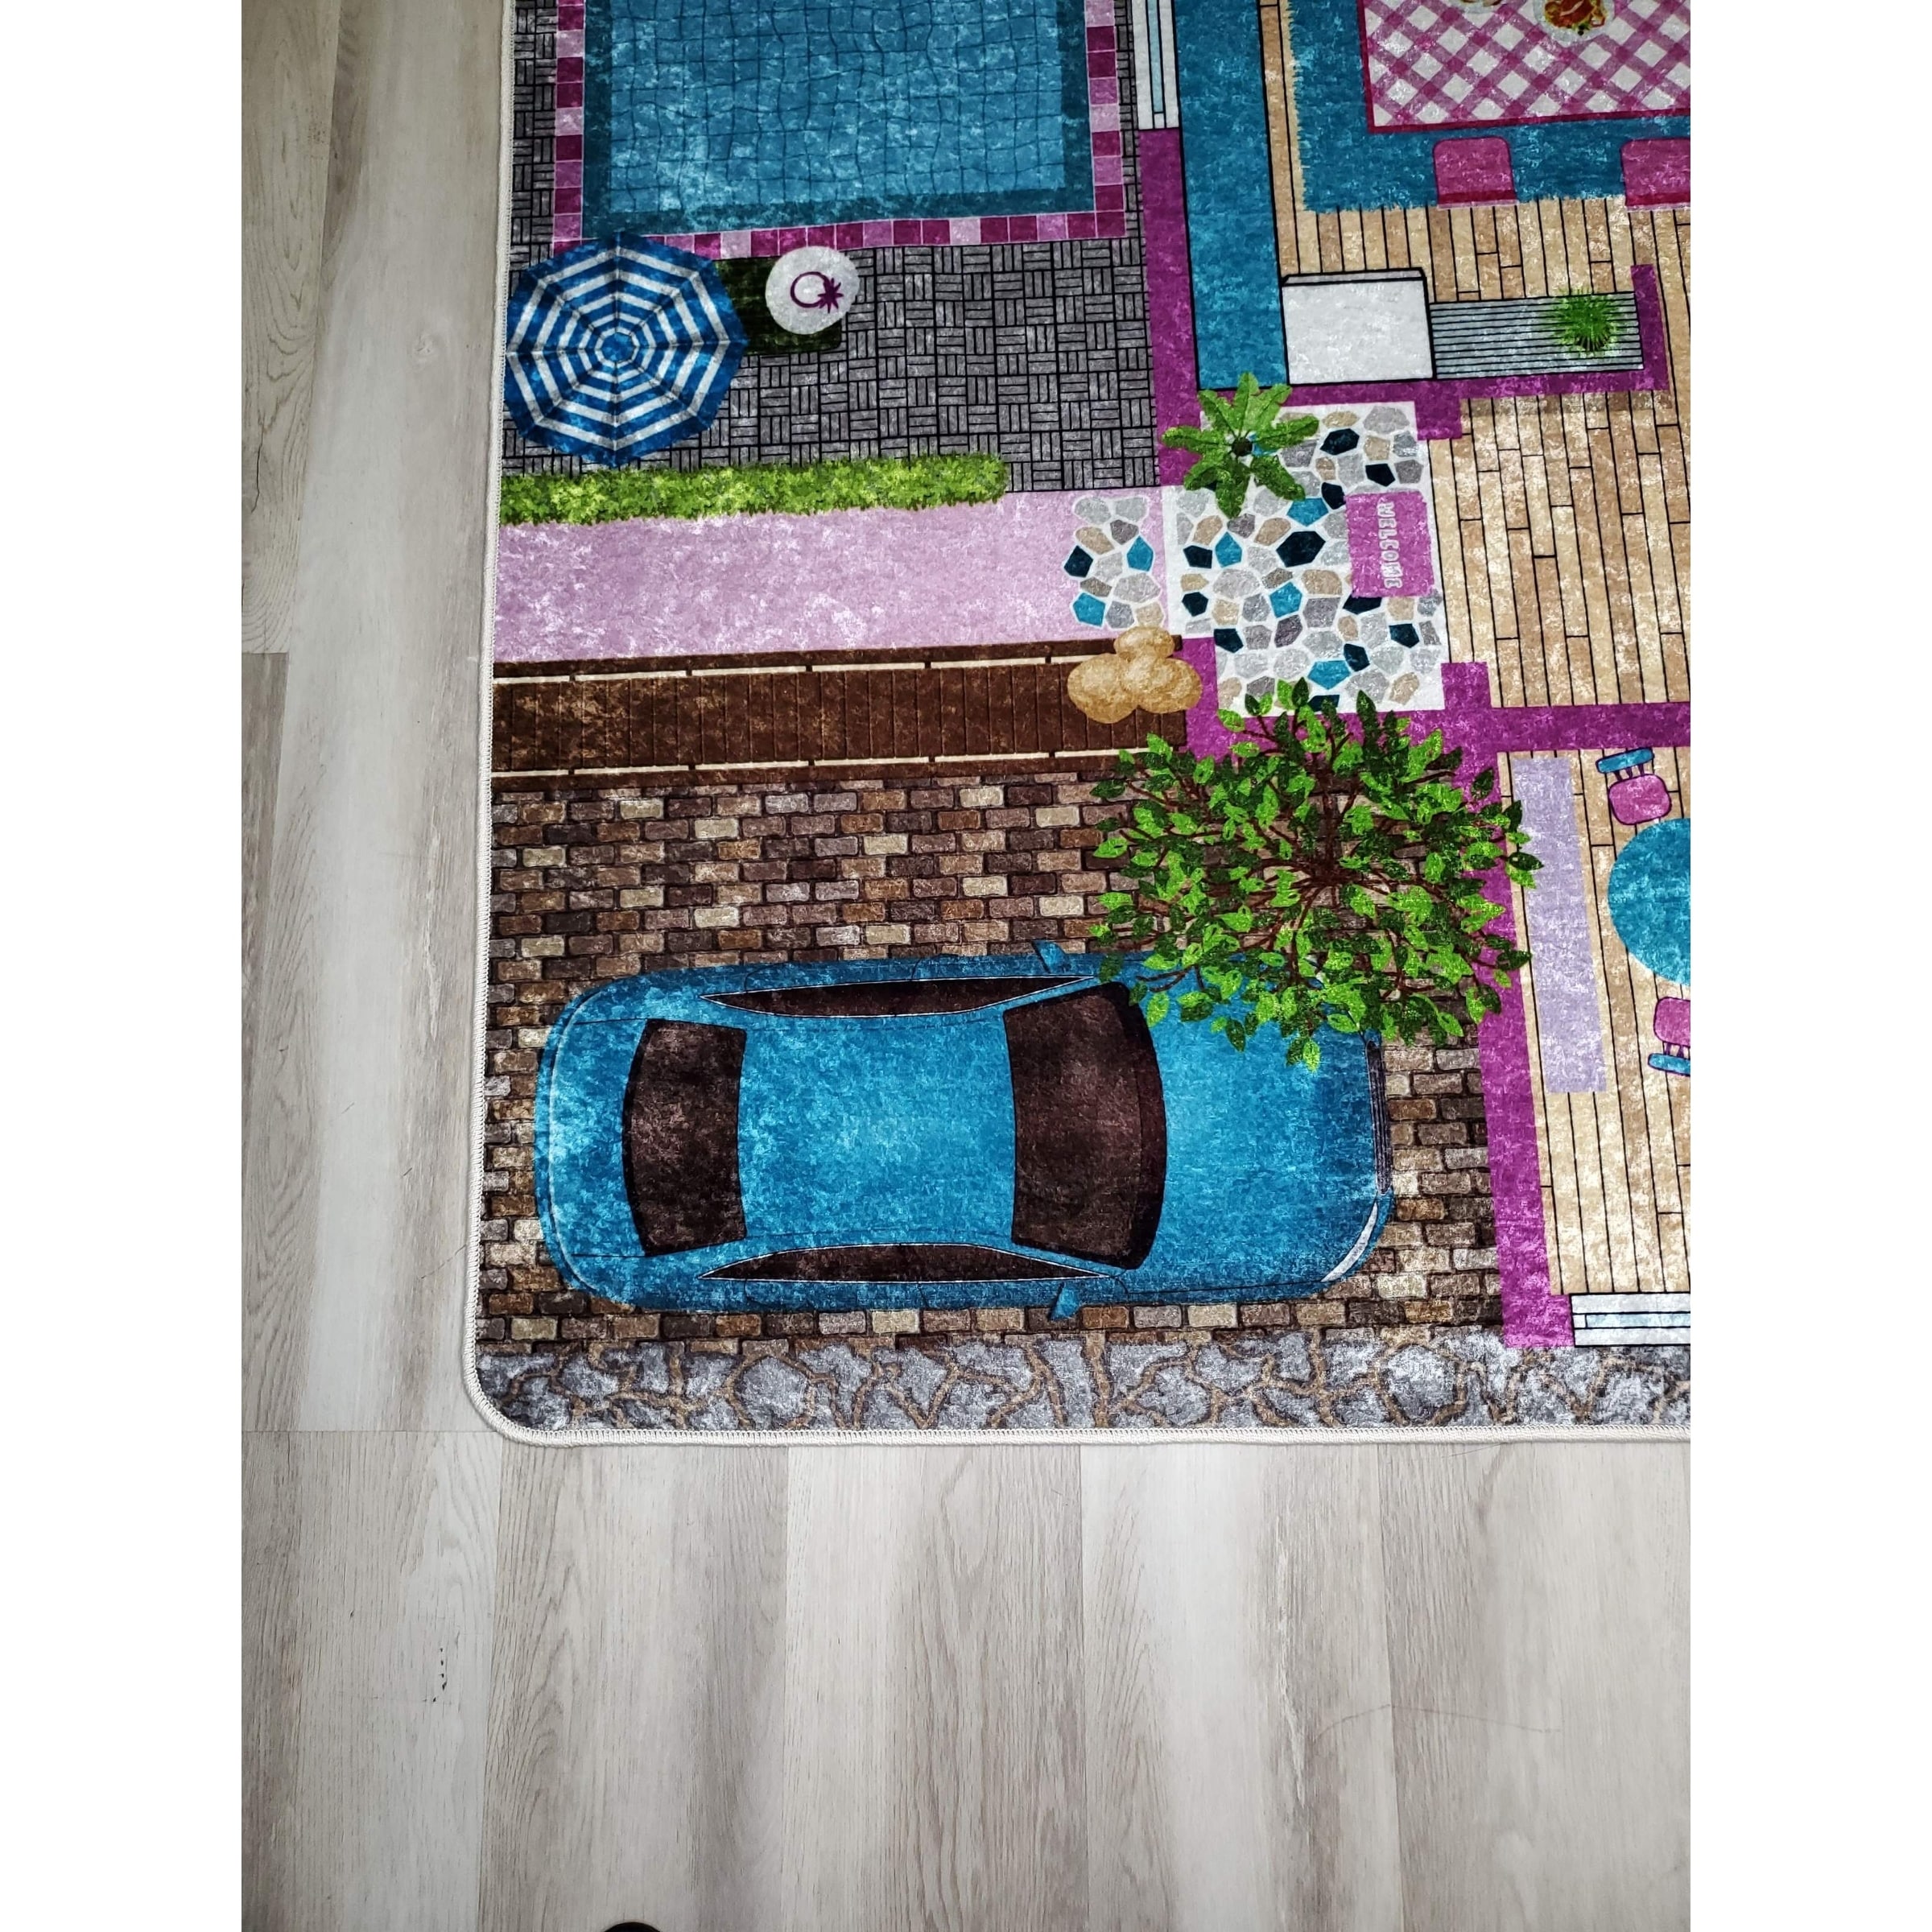 https://ak1.ostkcdn.com/images/products/29352035/La-Dole-Rugs-Pink-Turquoise-Blue-Barbie-Doll-House-Area-Rug-Mat-For-Kids-Childrens-room-Decoration-Playroom-5x7-8x10-7X9-feet-e77b6e0d-ddcd-4240-b164-5f17171f3288.jpg